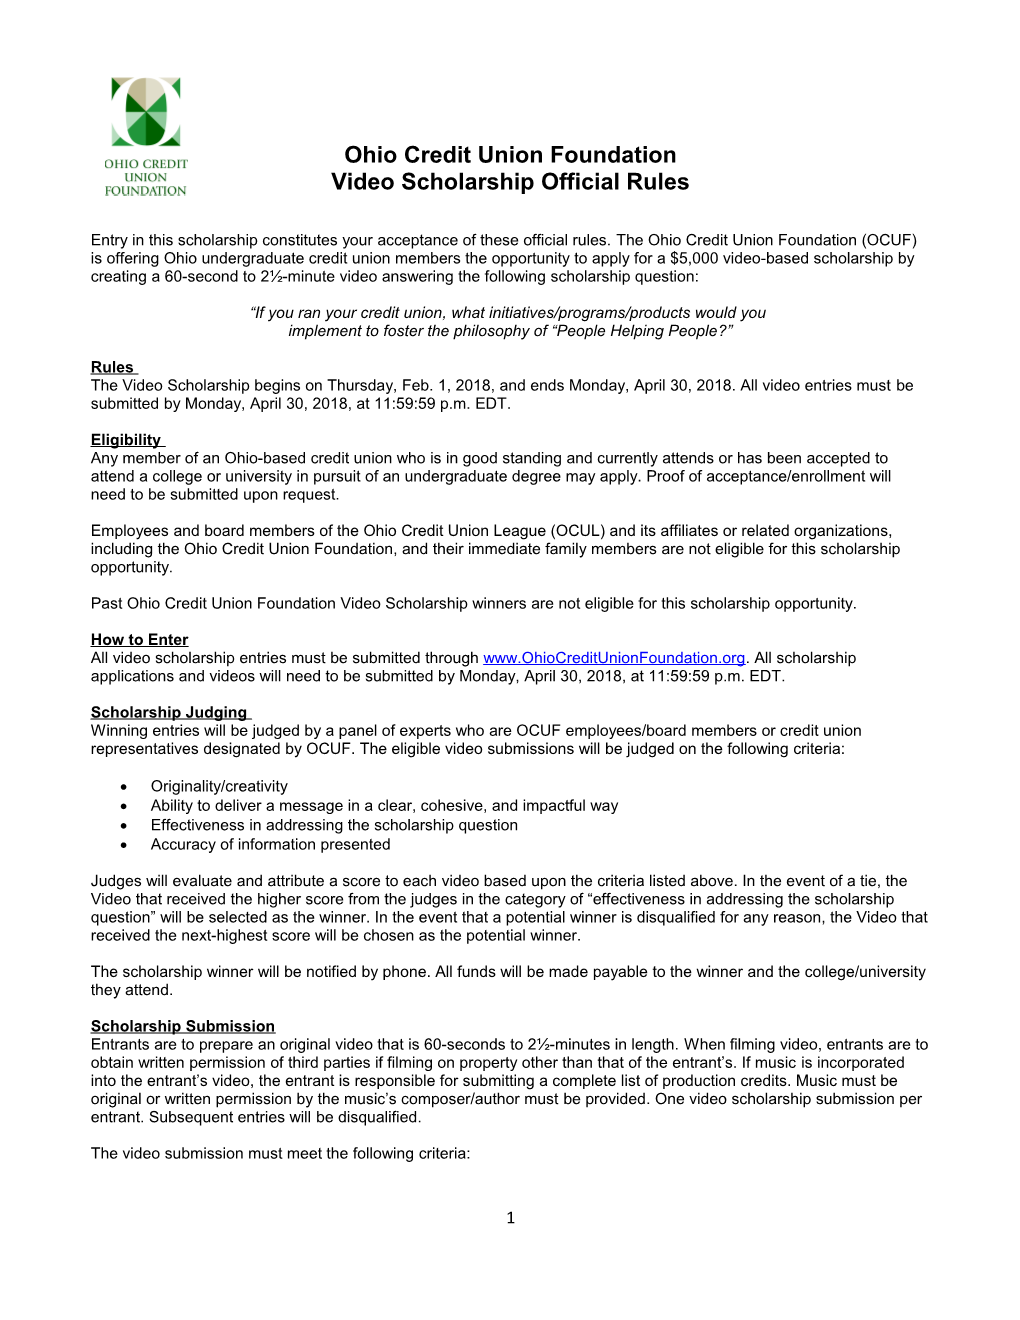 Ohio Credit Union Foundation Video Scholarship Official Rules